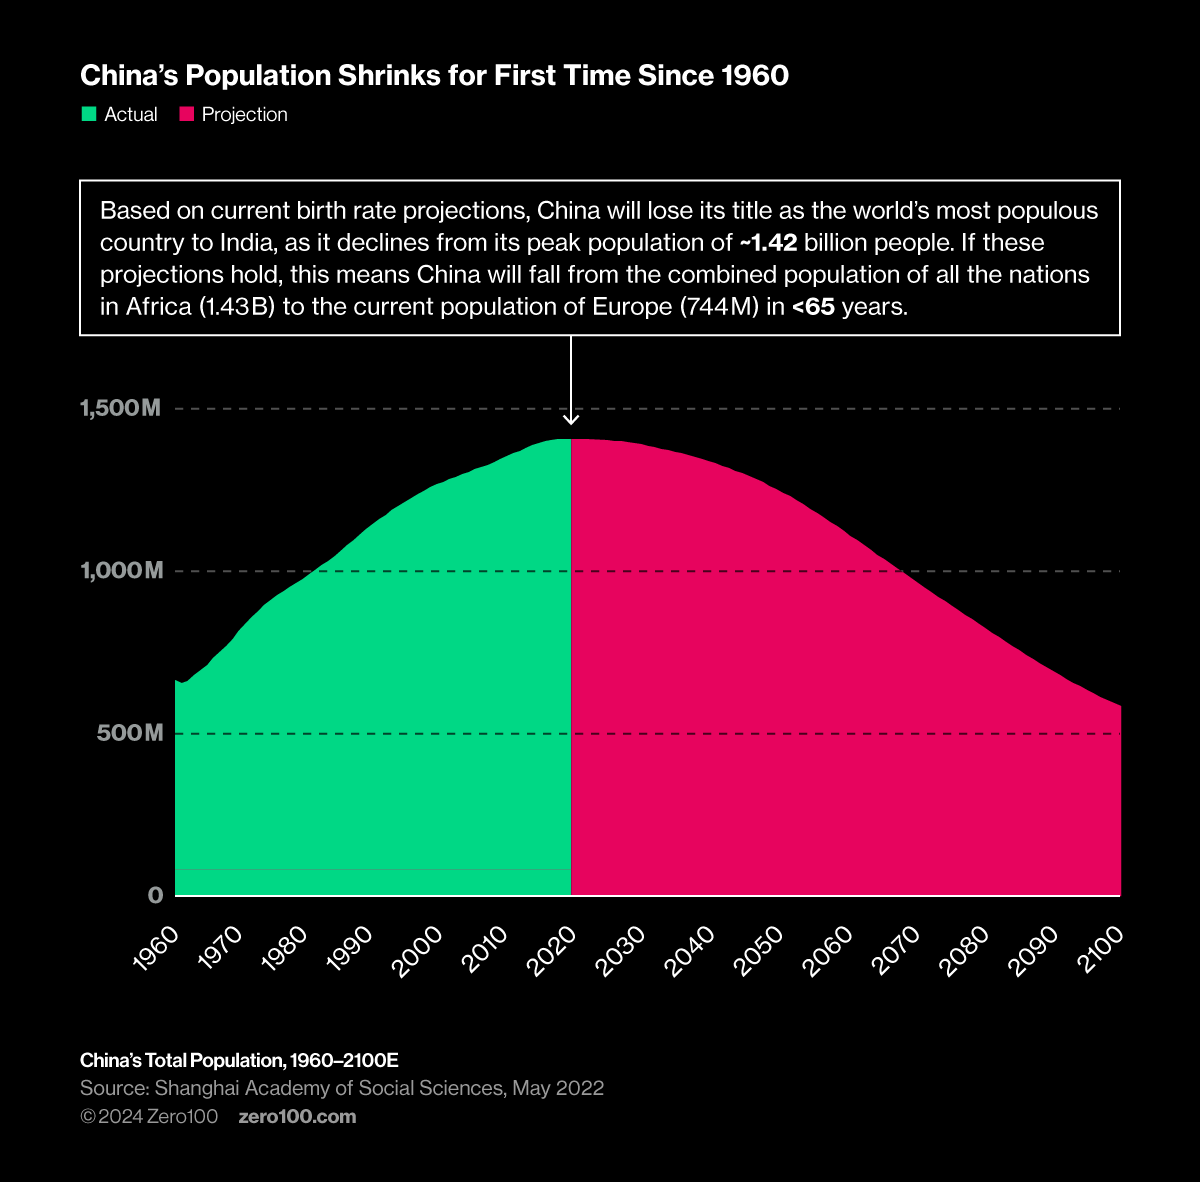 Graph depicting how China's populations shrinks for the first time since 1960.